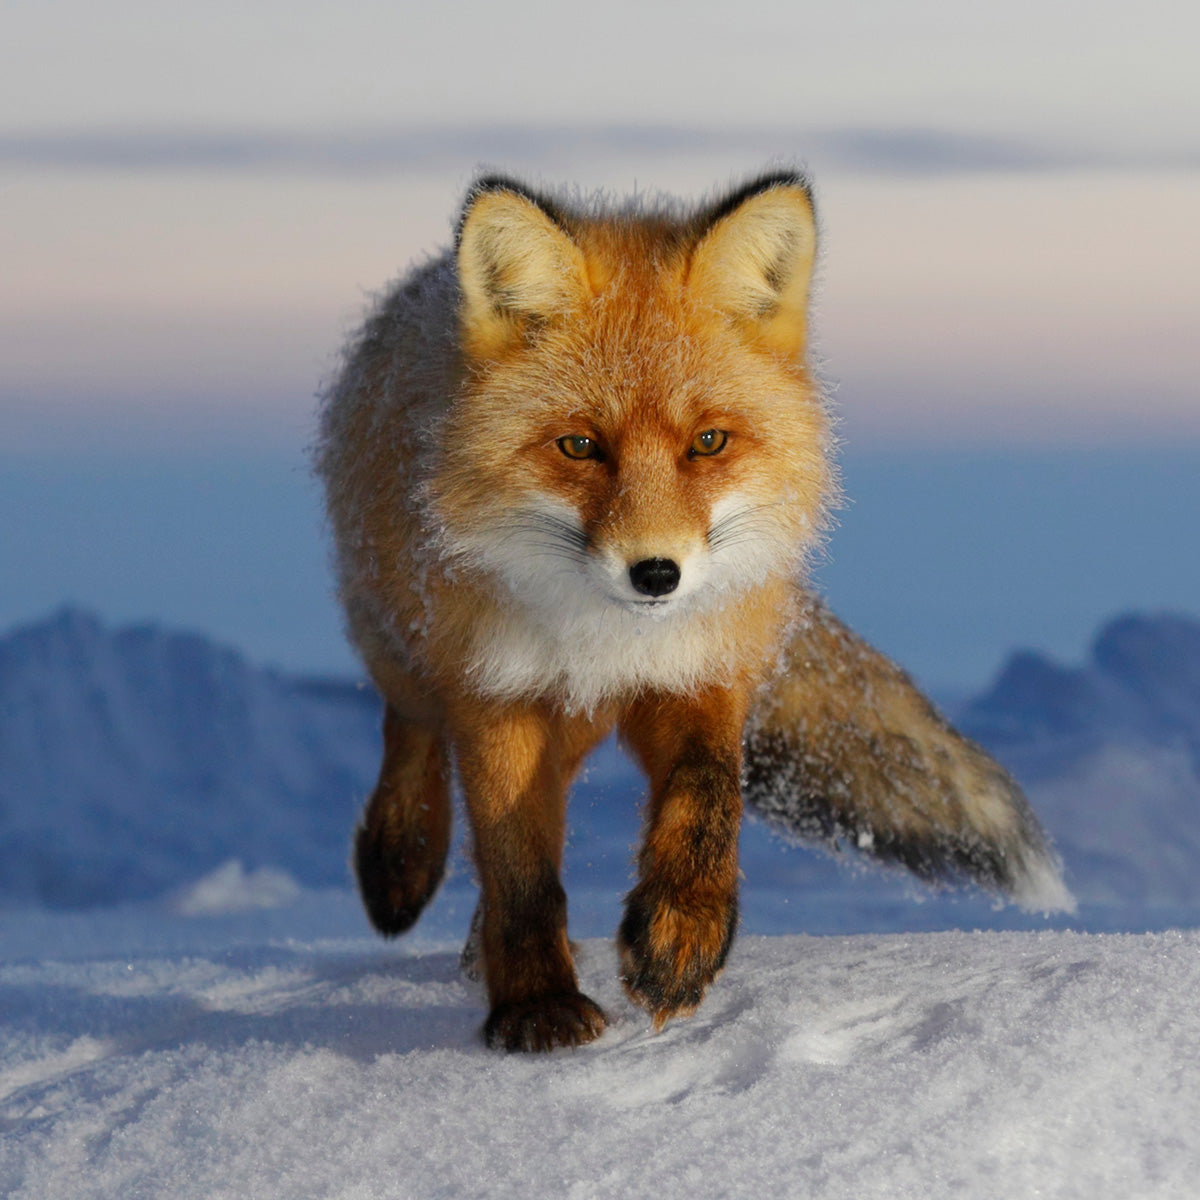 A photo of a red fox walking in the snow